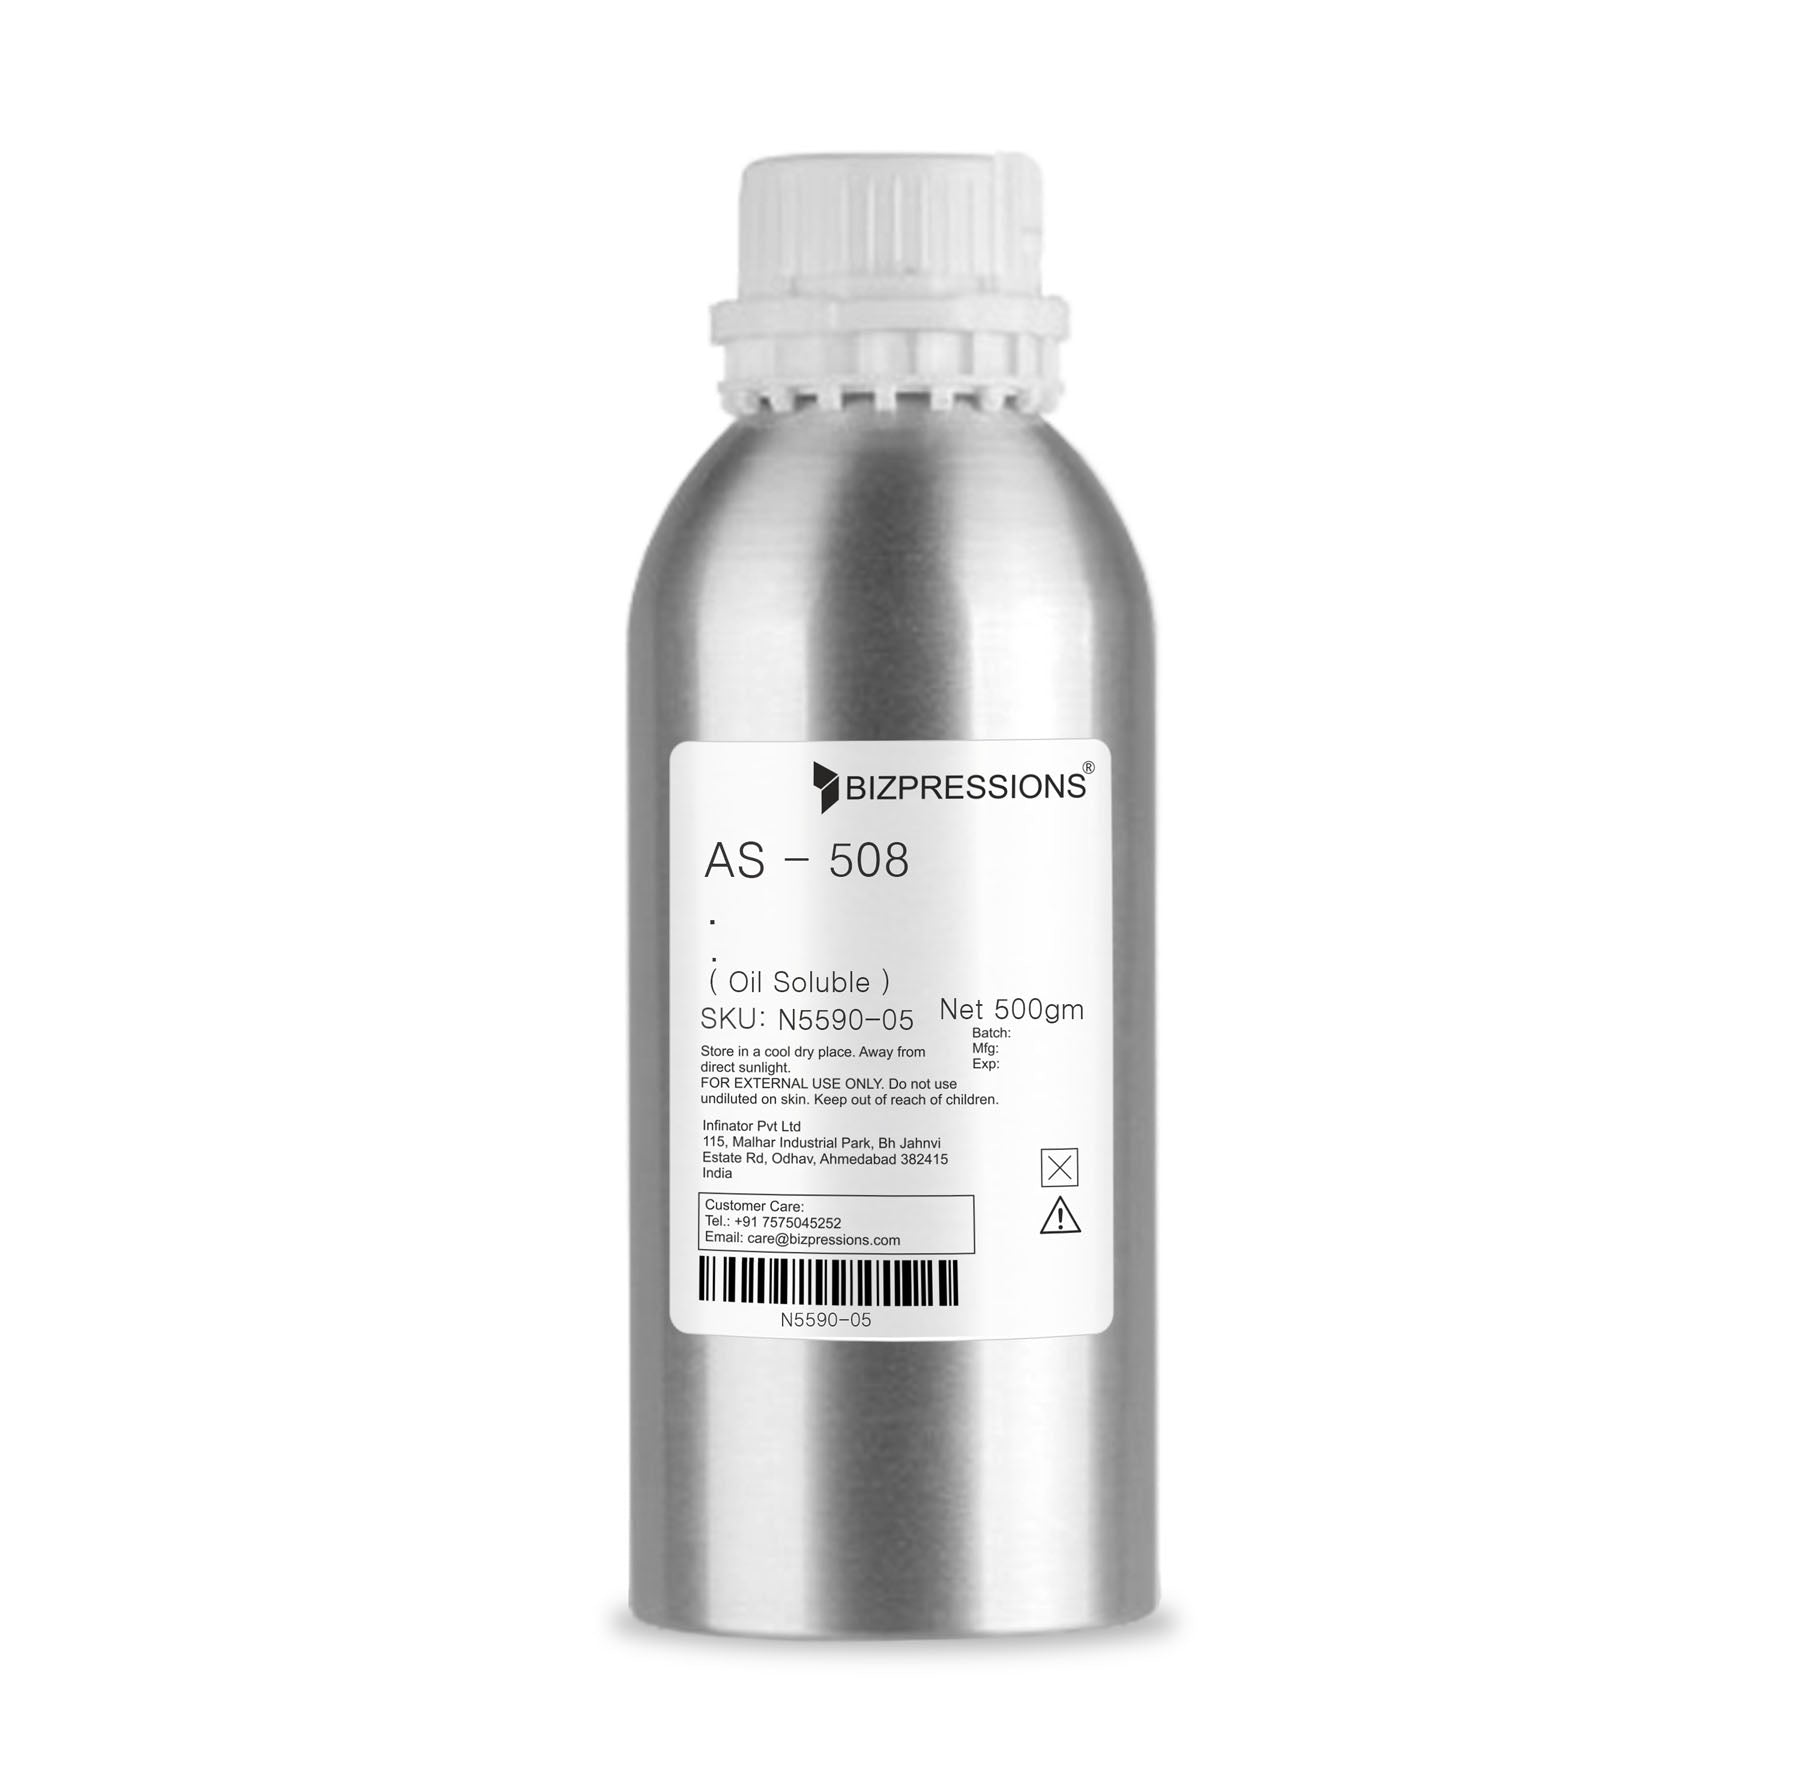 AS - 508 - Fragrance ( Oil Soluble ) - 500 gm